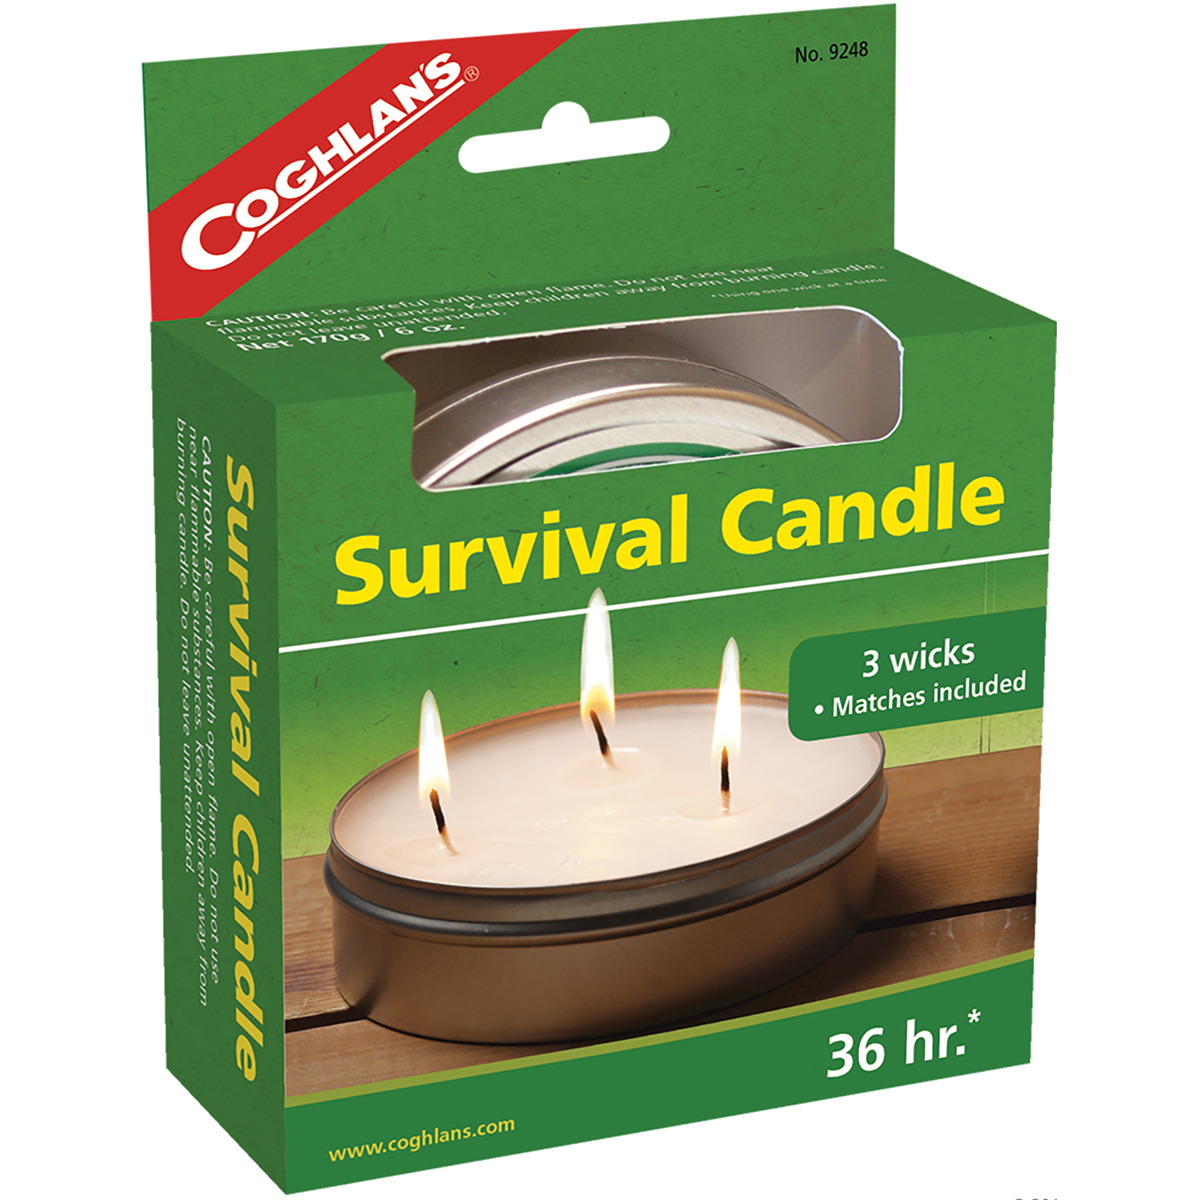 Coghlans Emergency Survival Candle 36 Hour - image 3 of 3